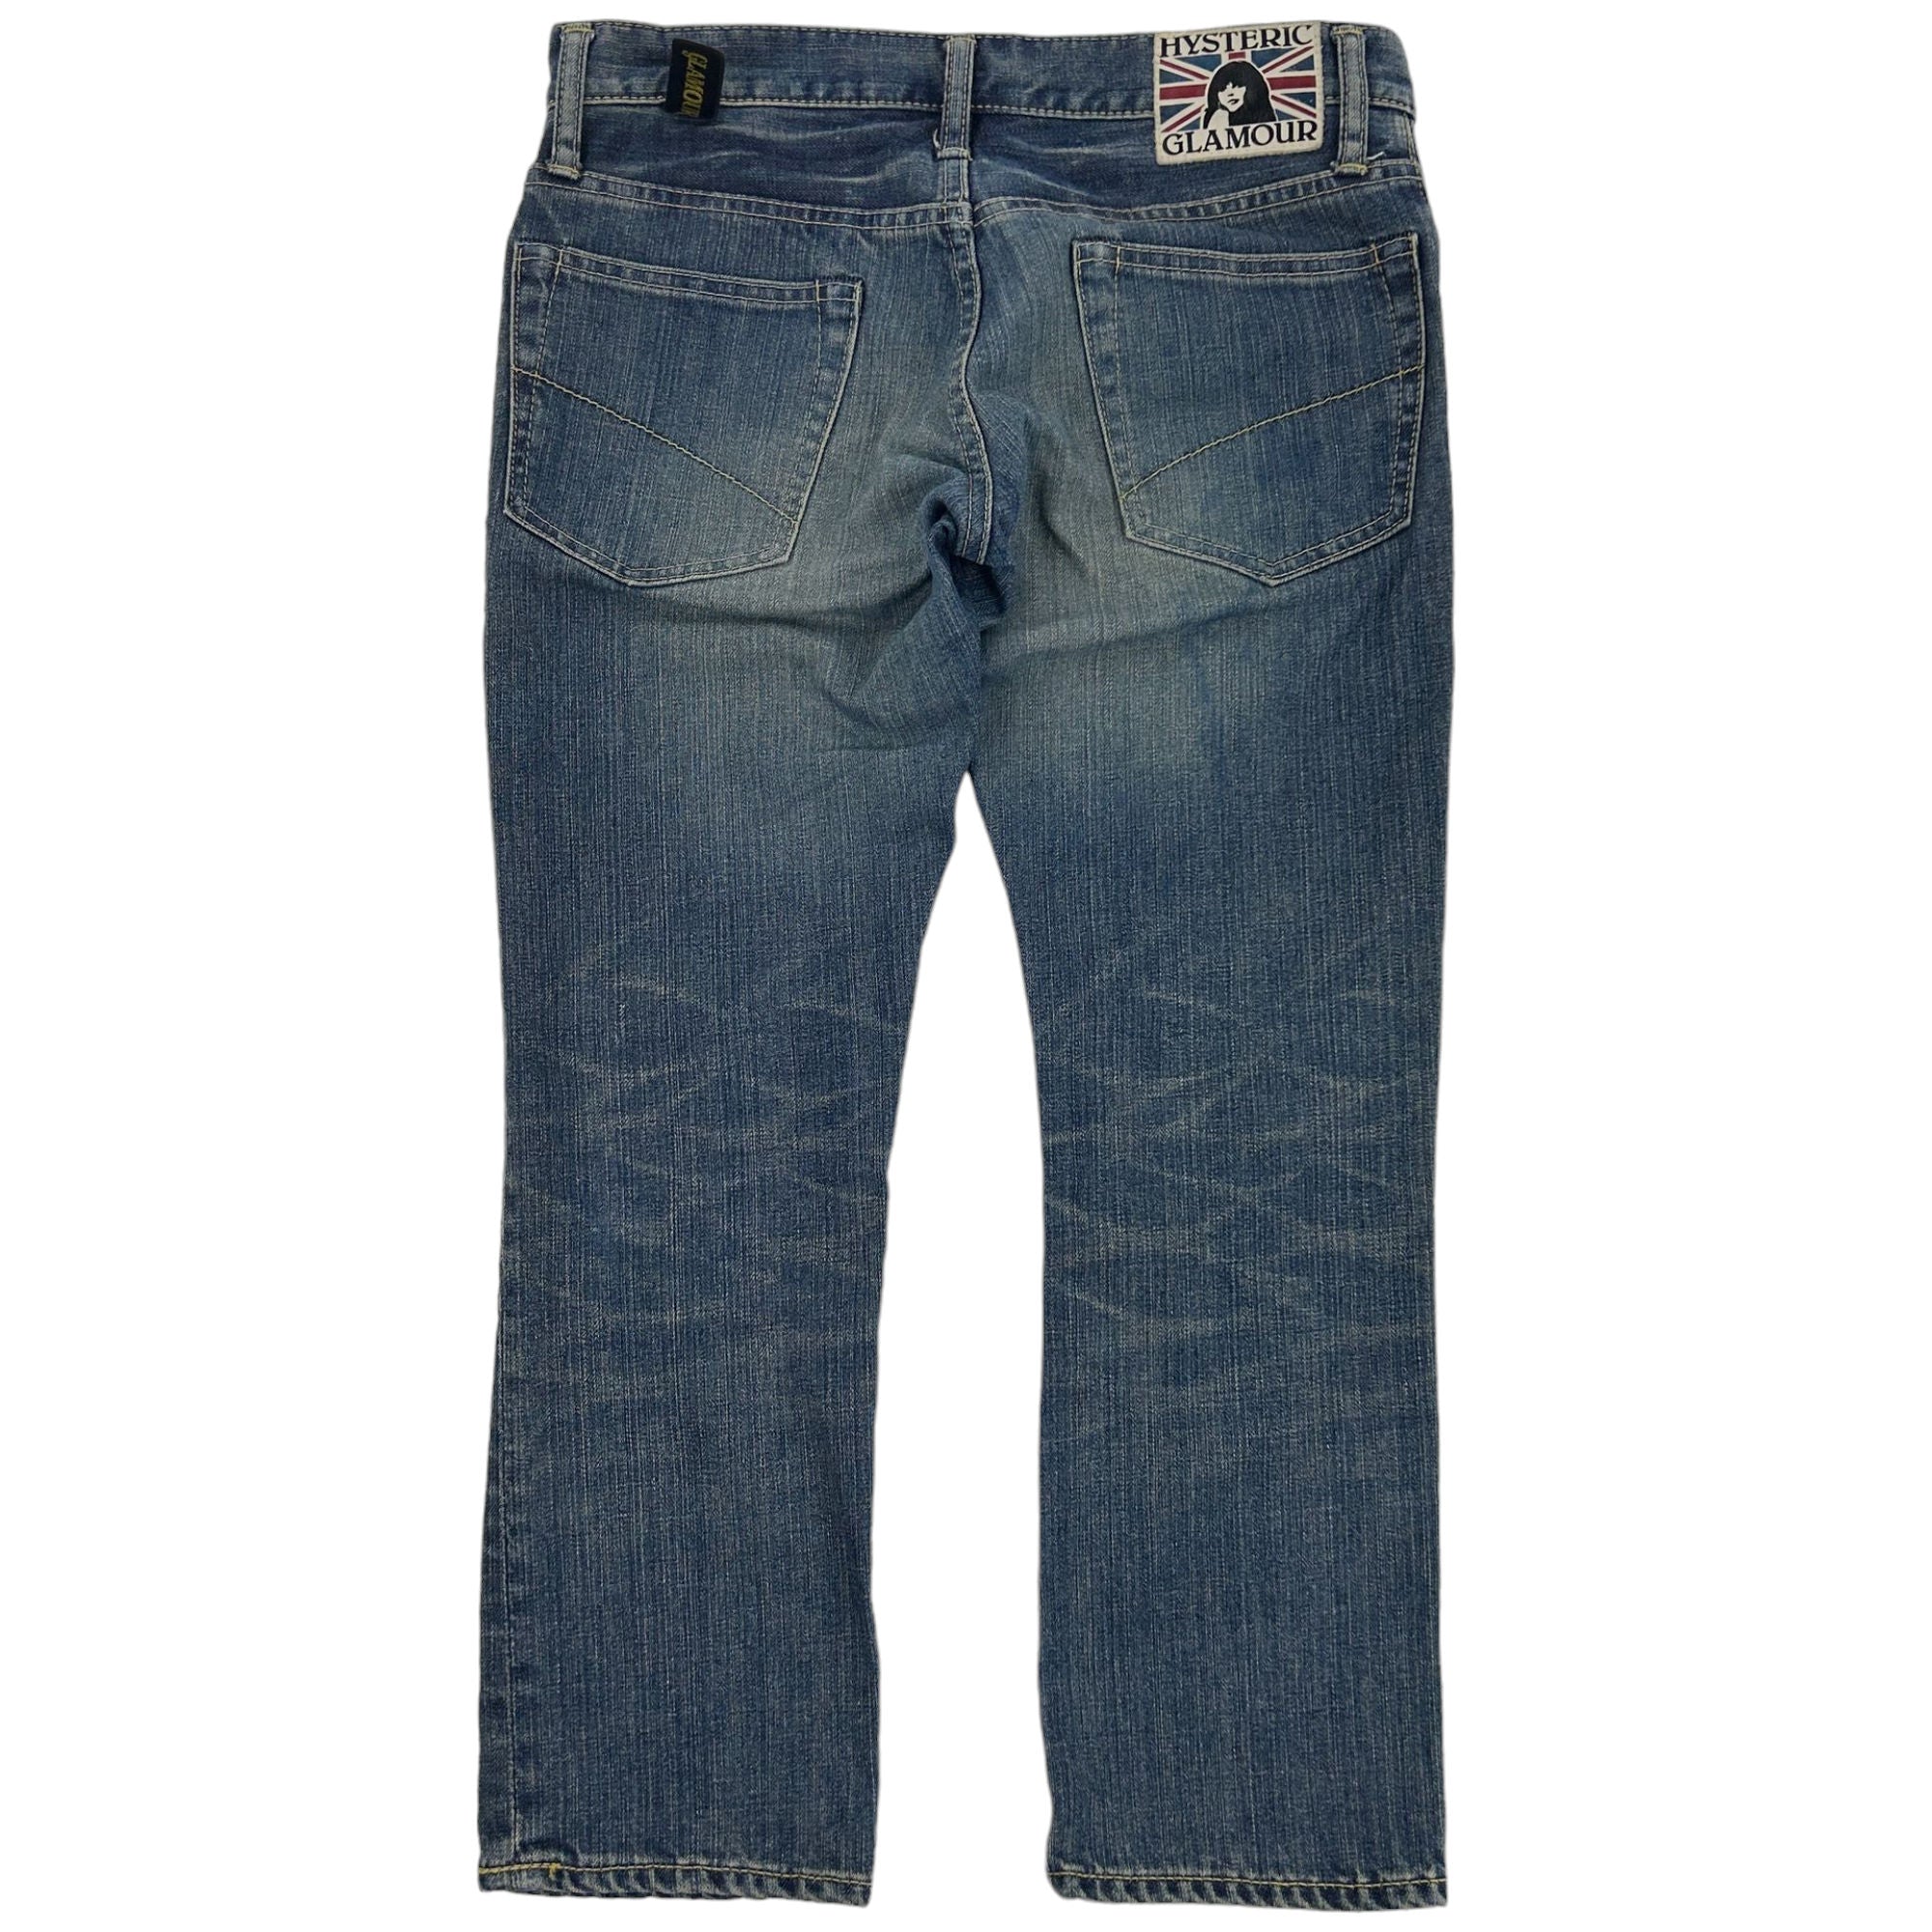 Hysteric Glamour Blue Jeans Studded Trousers Cotton y2k Streetwear 